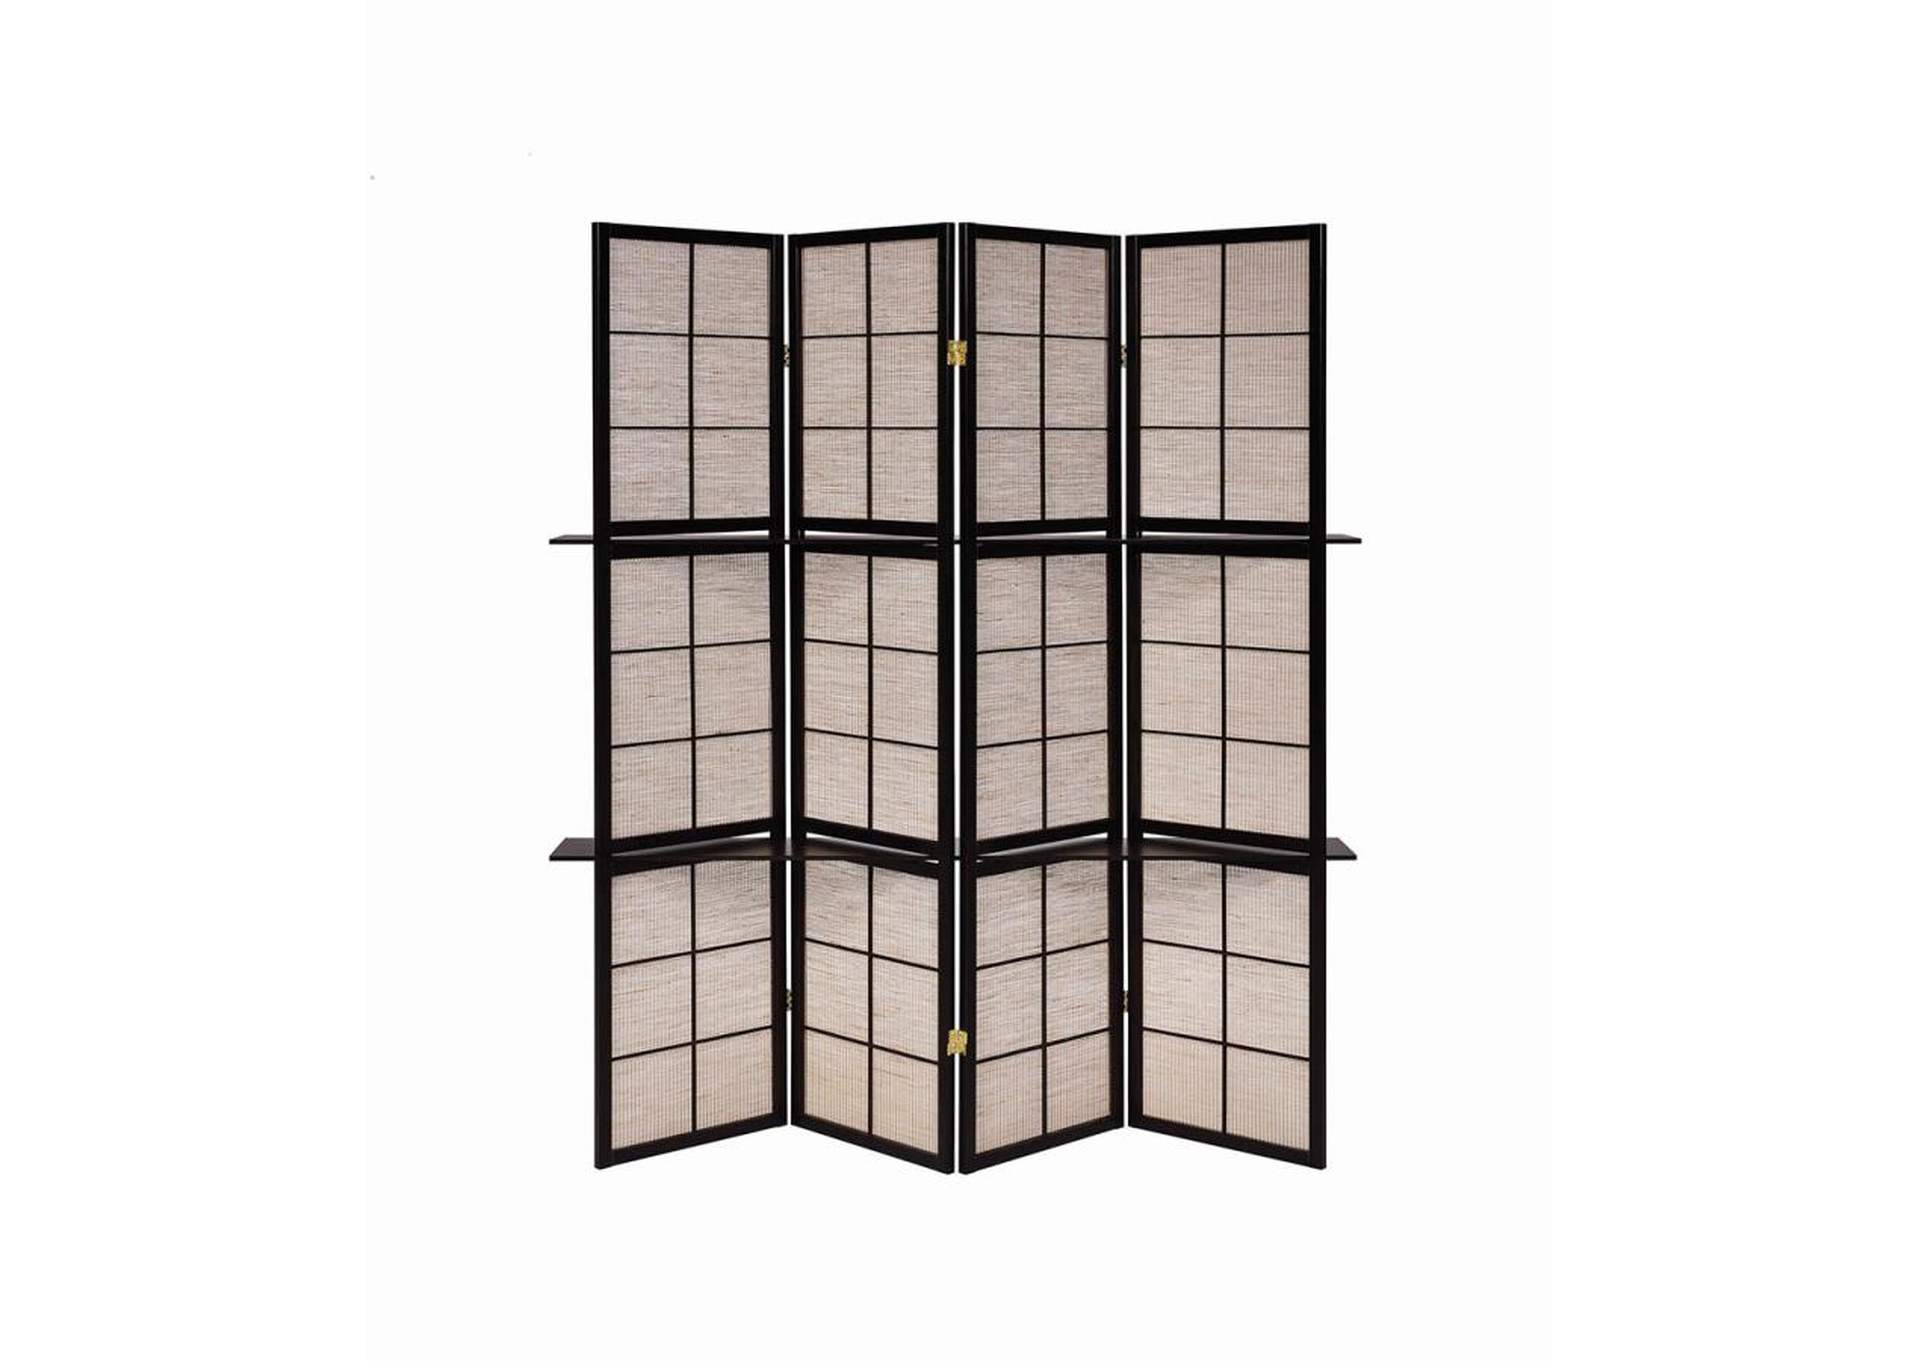 Iggy 4-Panel Folding Screen With Removable Shelves Tan And Cappuccino,Coaster Furniture